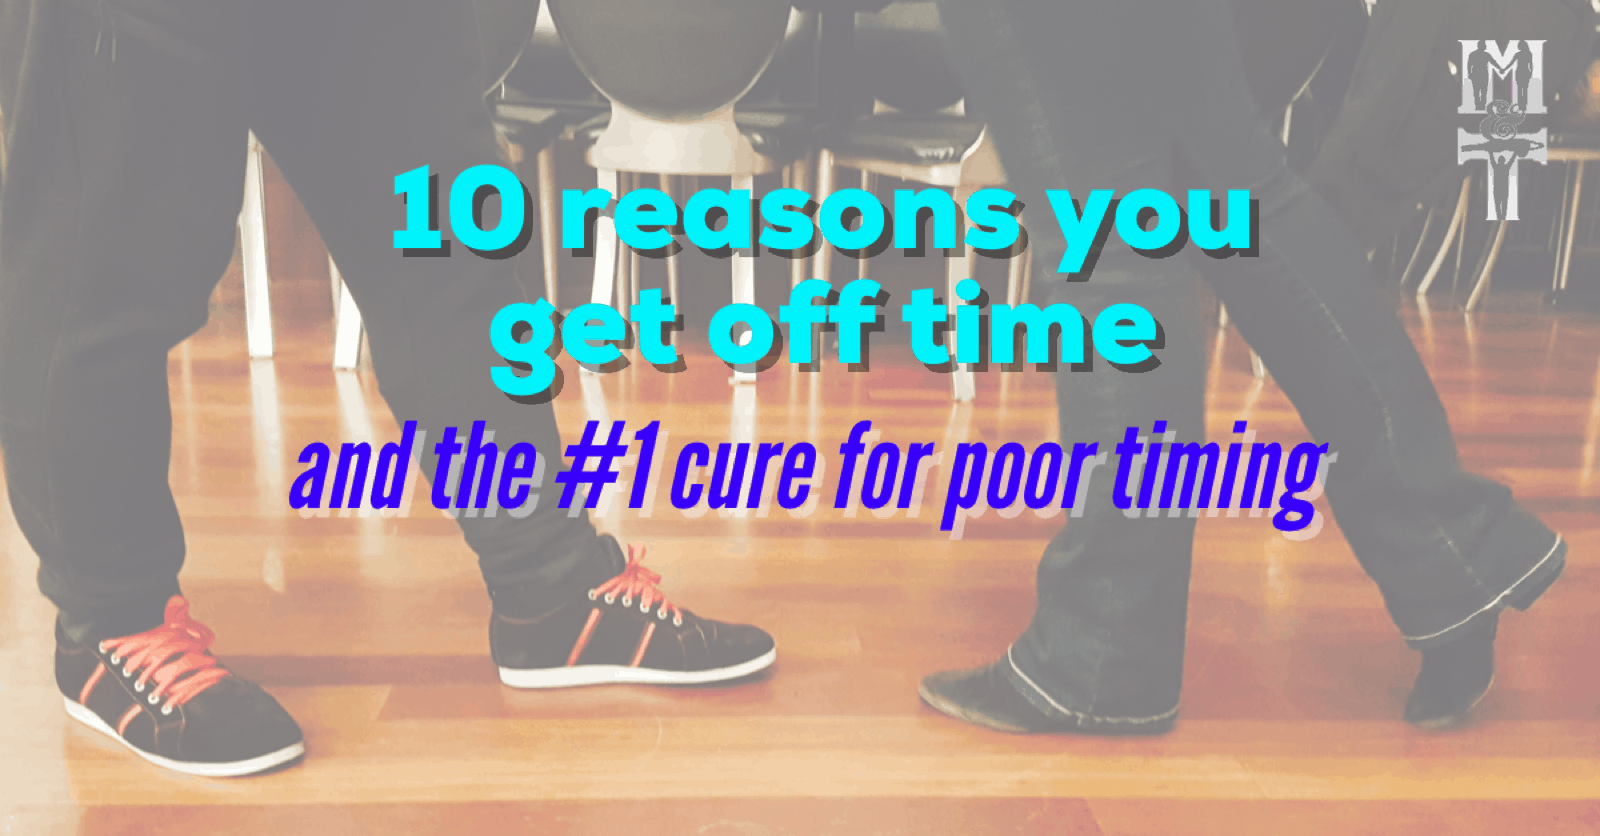 10-reasons-you-get-off-time-and-the-1-way-to-cure-poor-timing